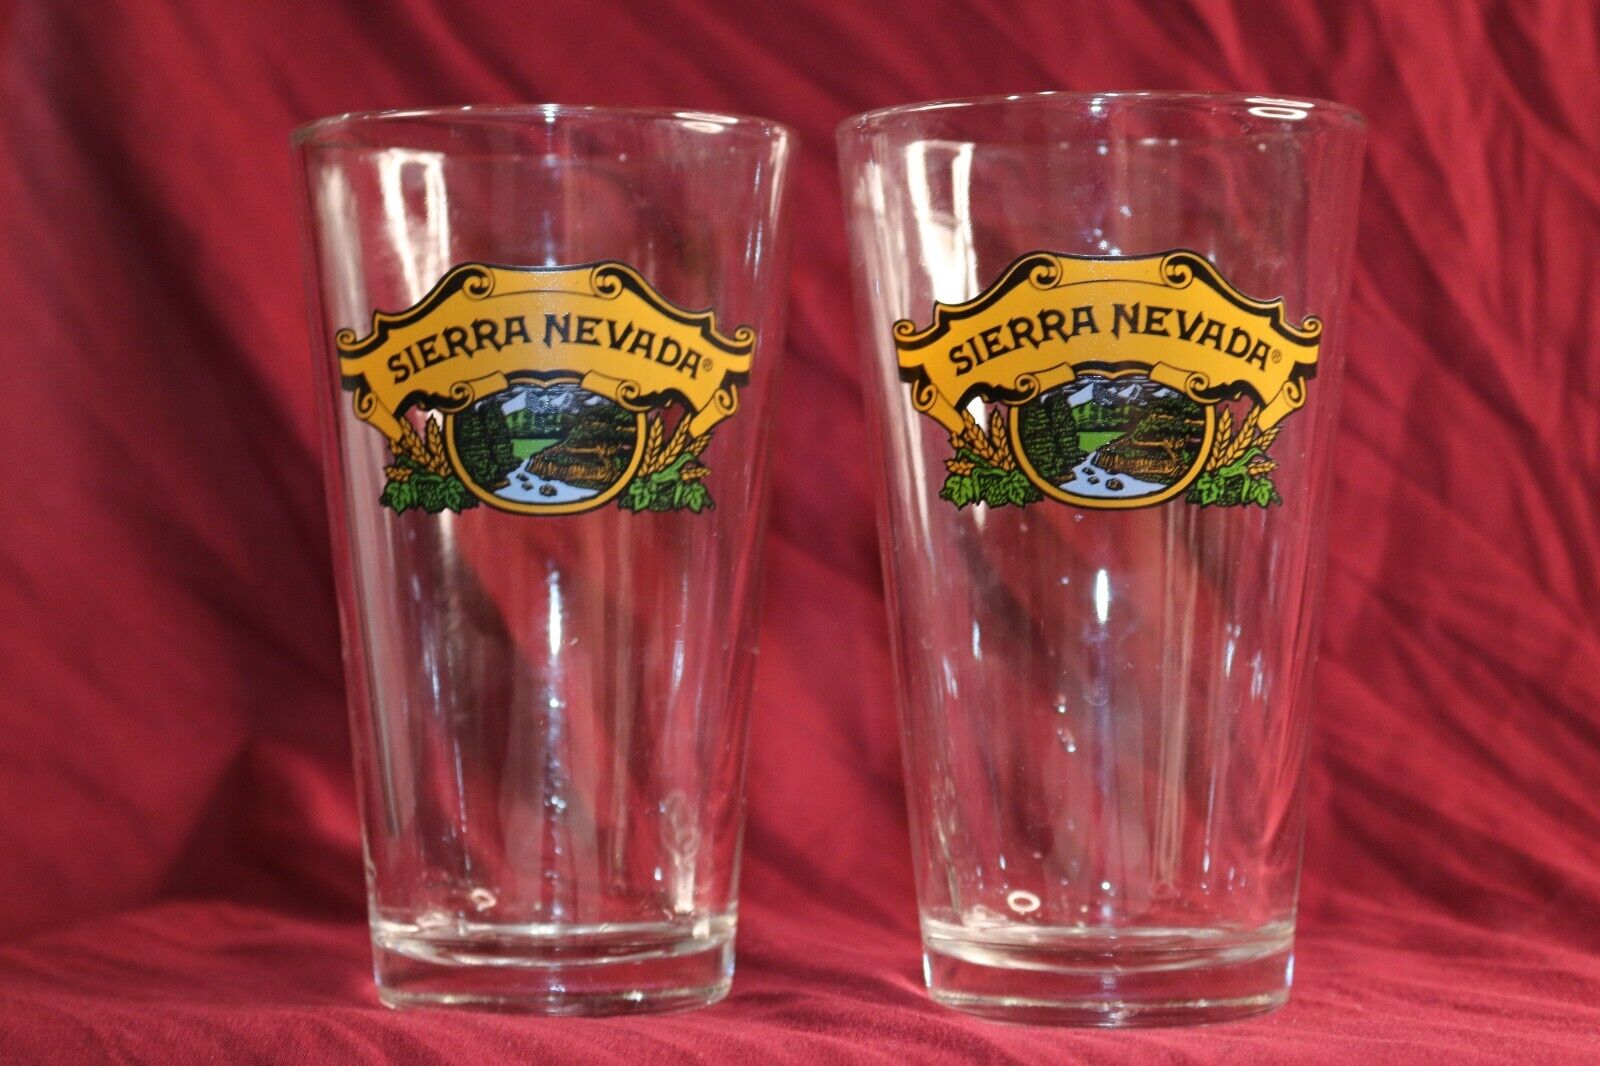 Pair of Sierra Nevada Chico California Pint Glasses (Two) Craft 16oz Beer Glass